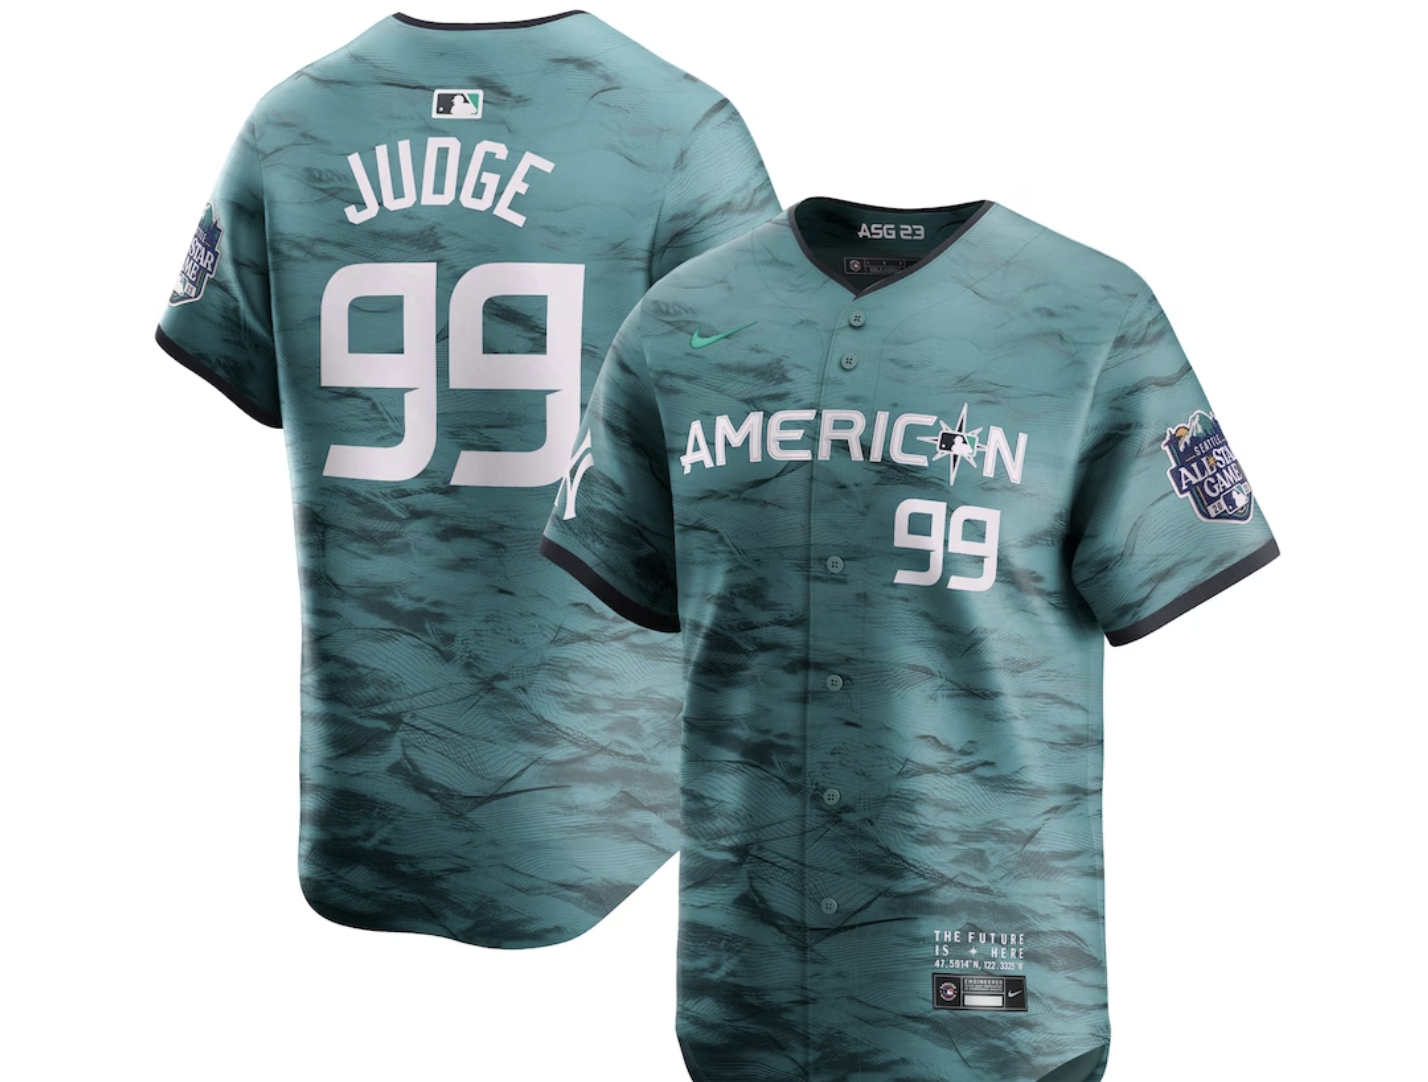 MLB's most popular jersey list includes San Diego Padres' All-Star